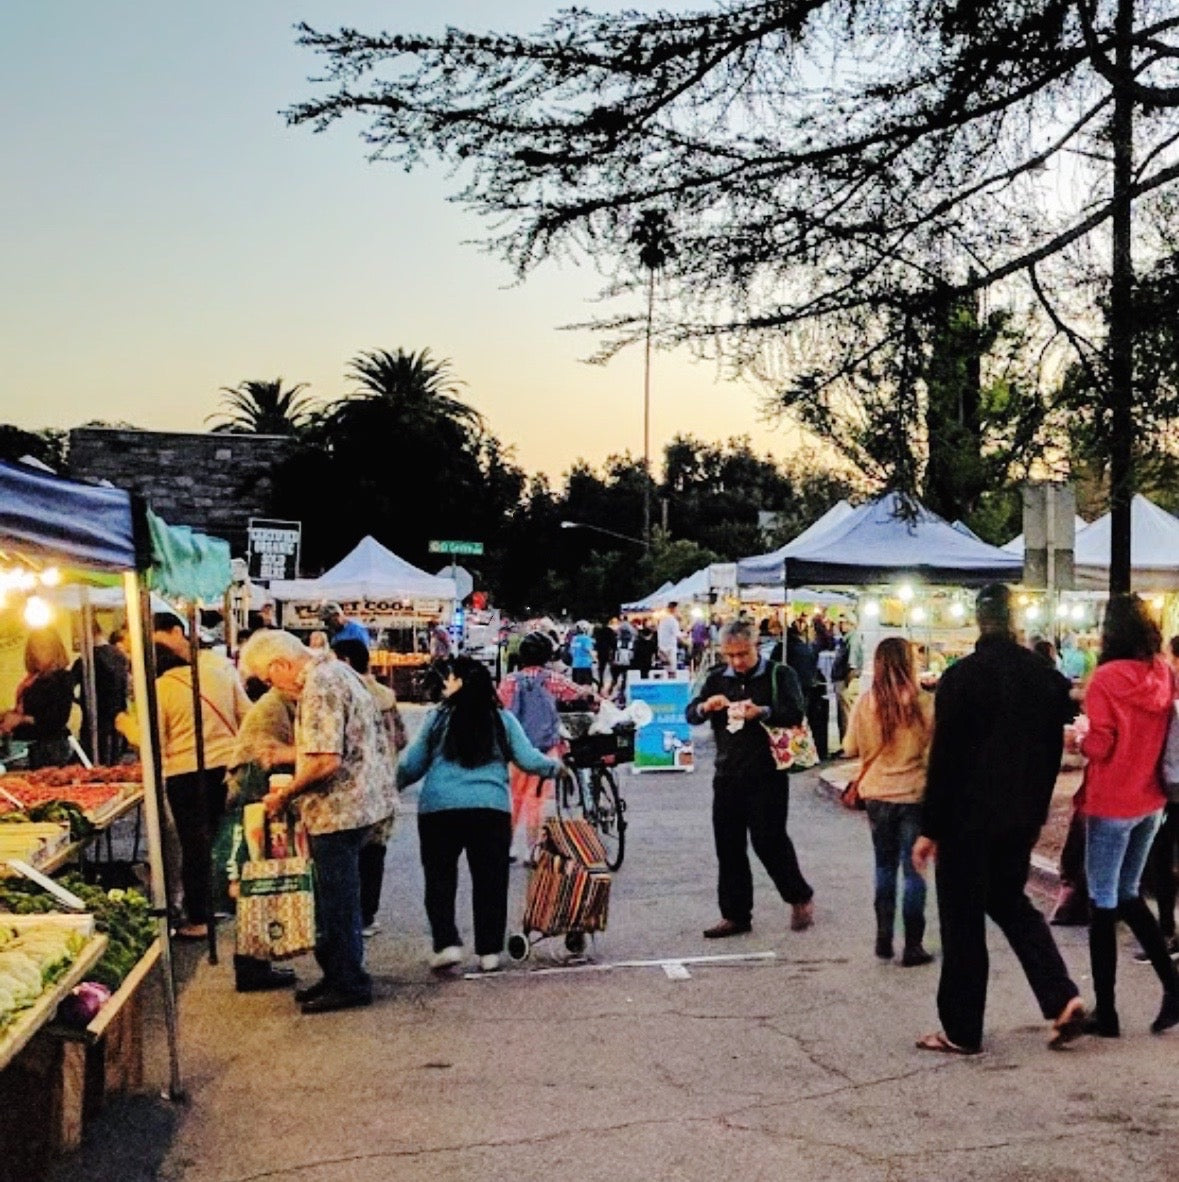 Picture of the South Pasadena Farmers Market during sunset